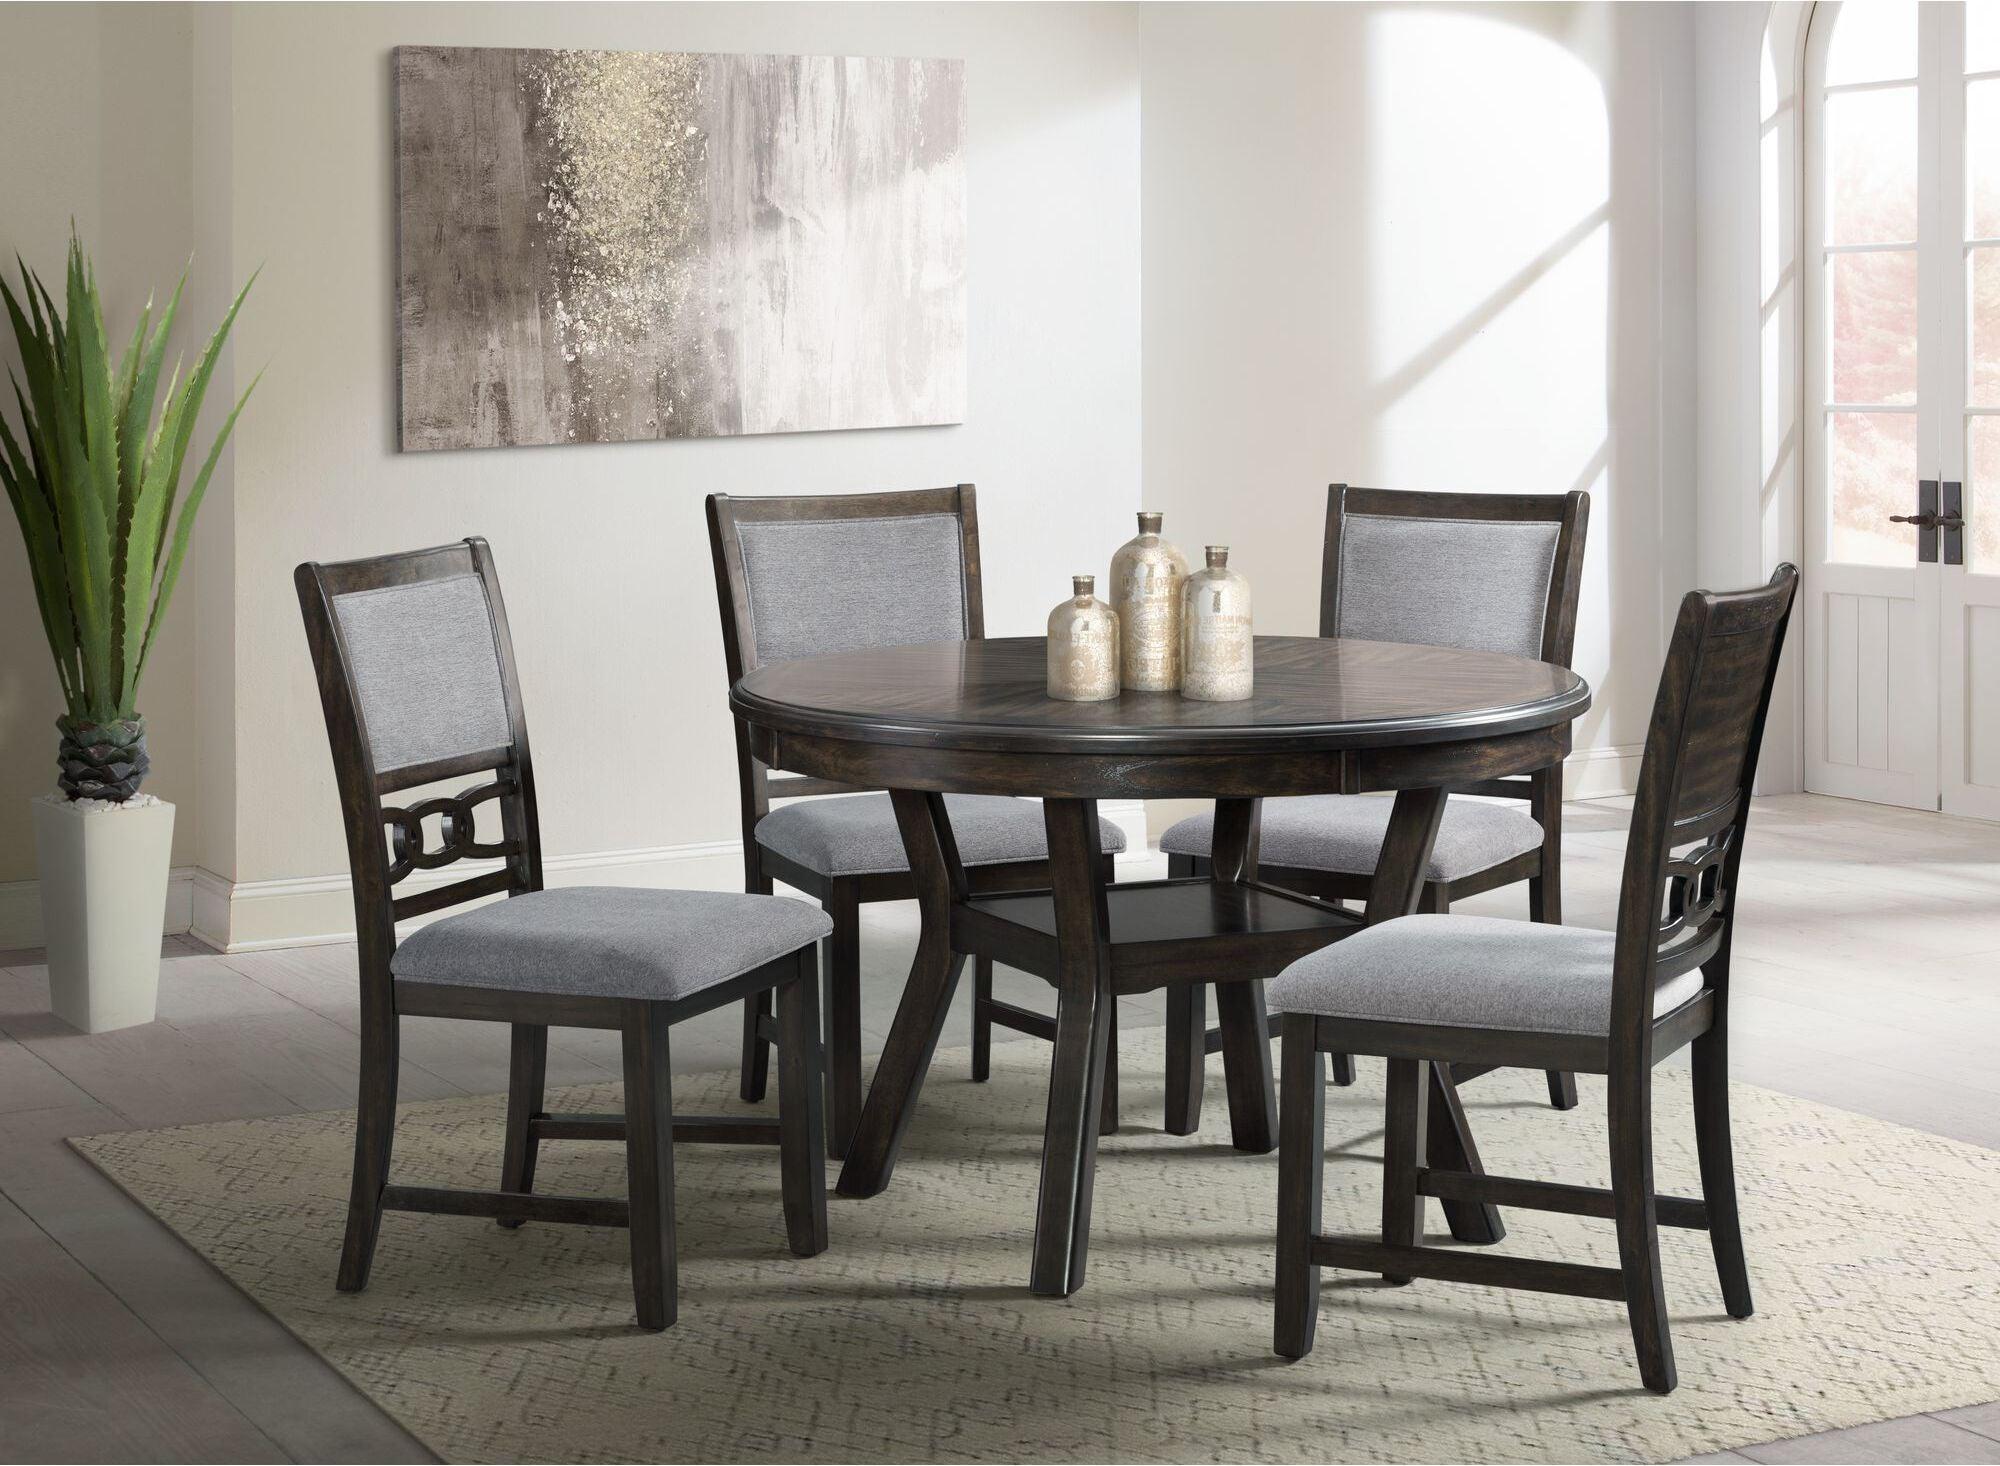 Elements Dining Chairs - Taylor Standard Height Side Chair Set in Walnut (Set of 2)